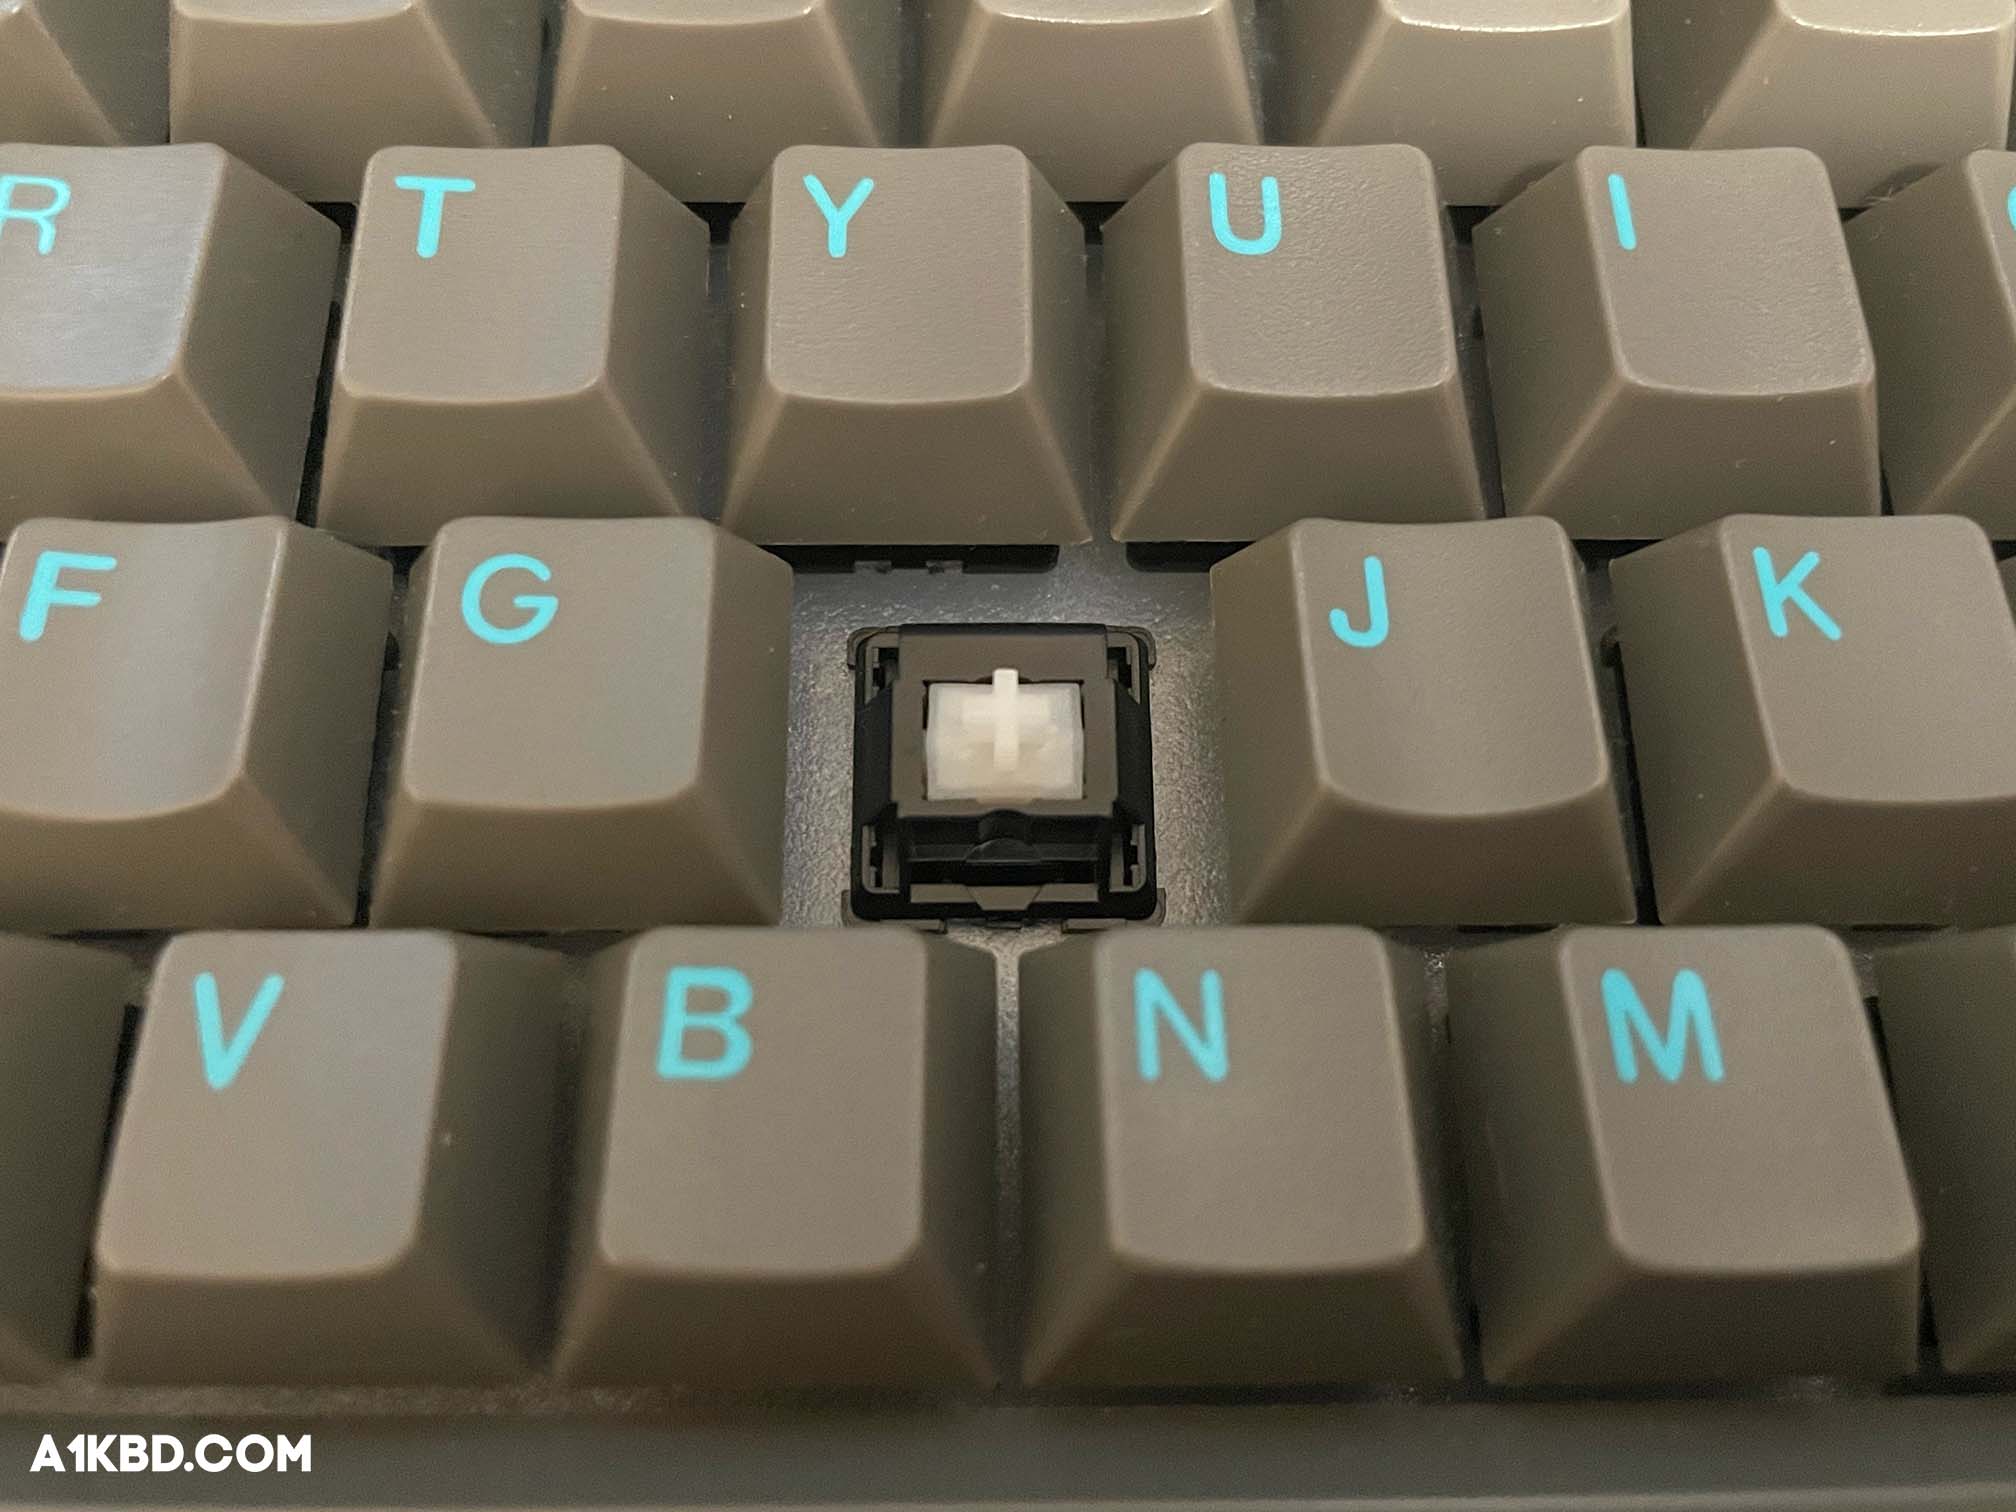 A switch secured in a mechanical keyboard.